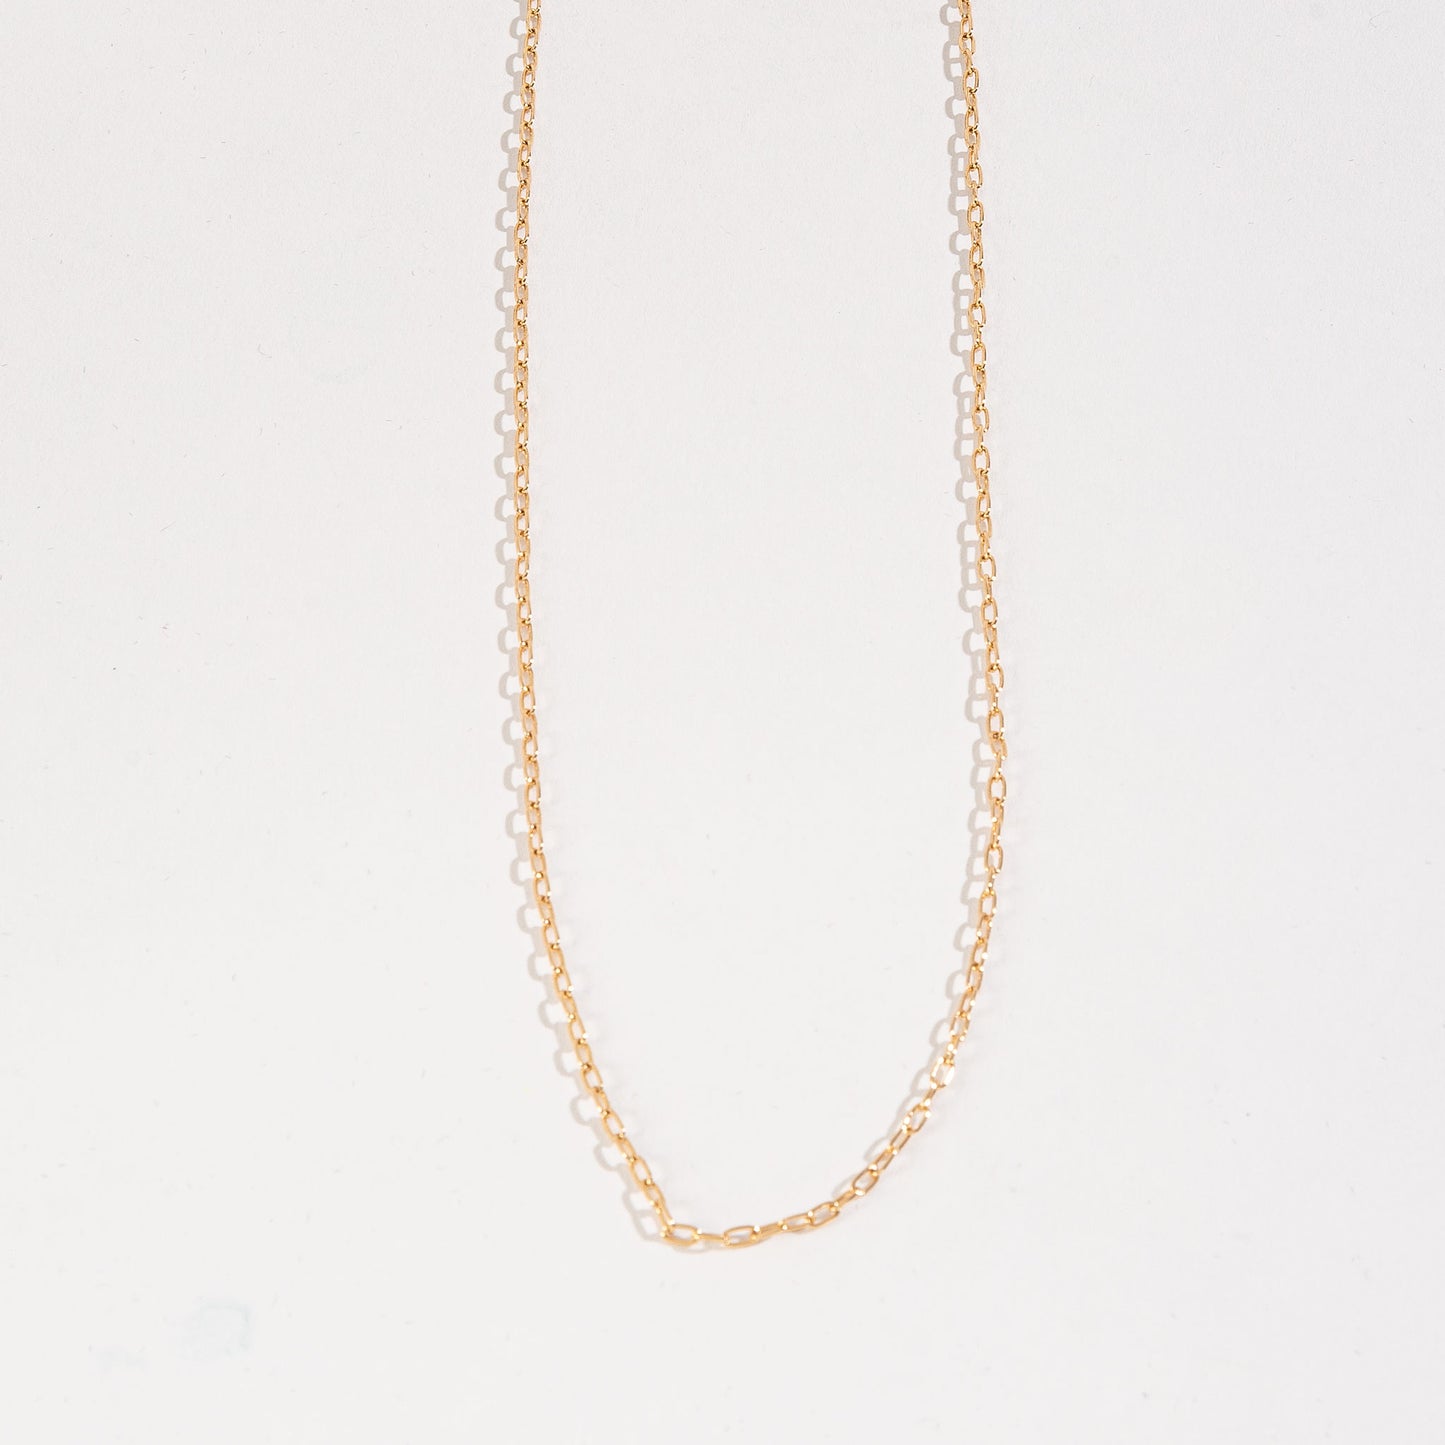 20" 2mm Oval Chain Necklace